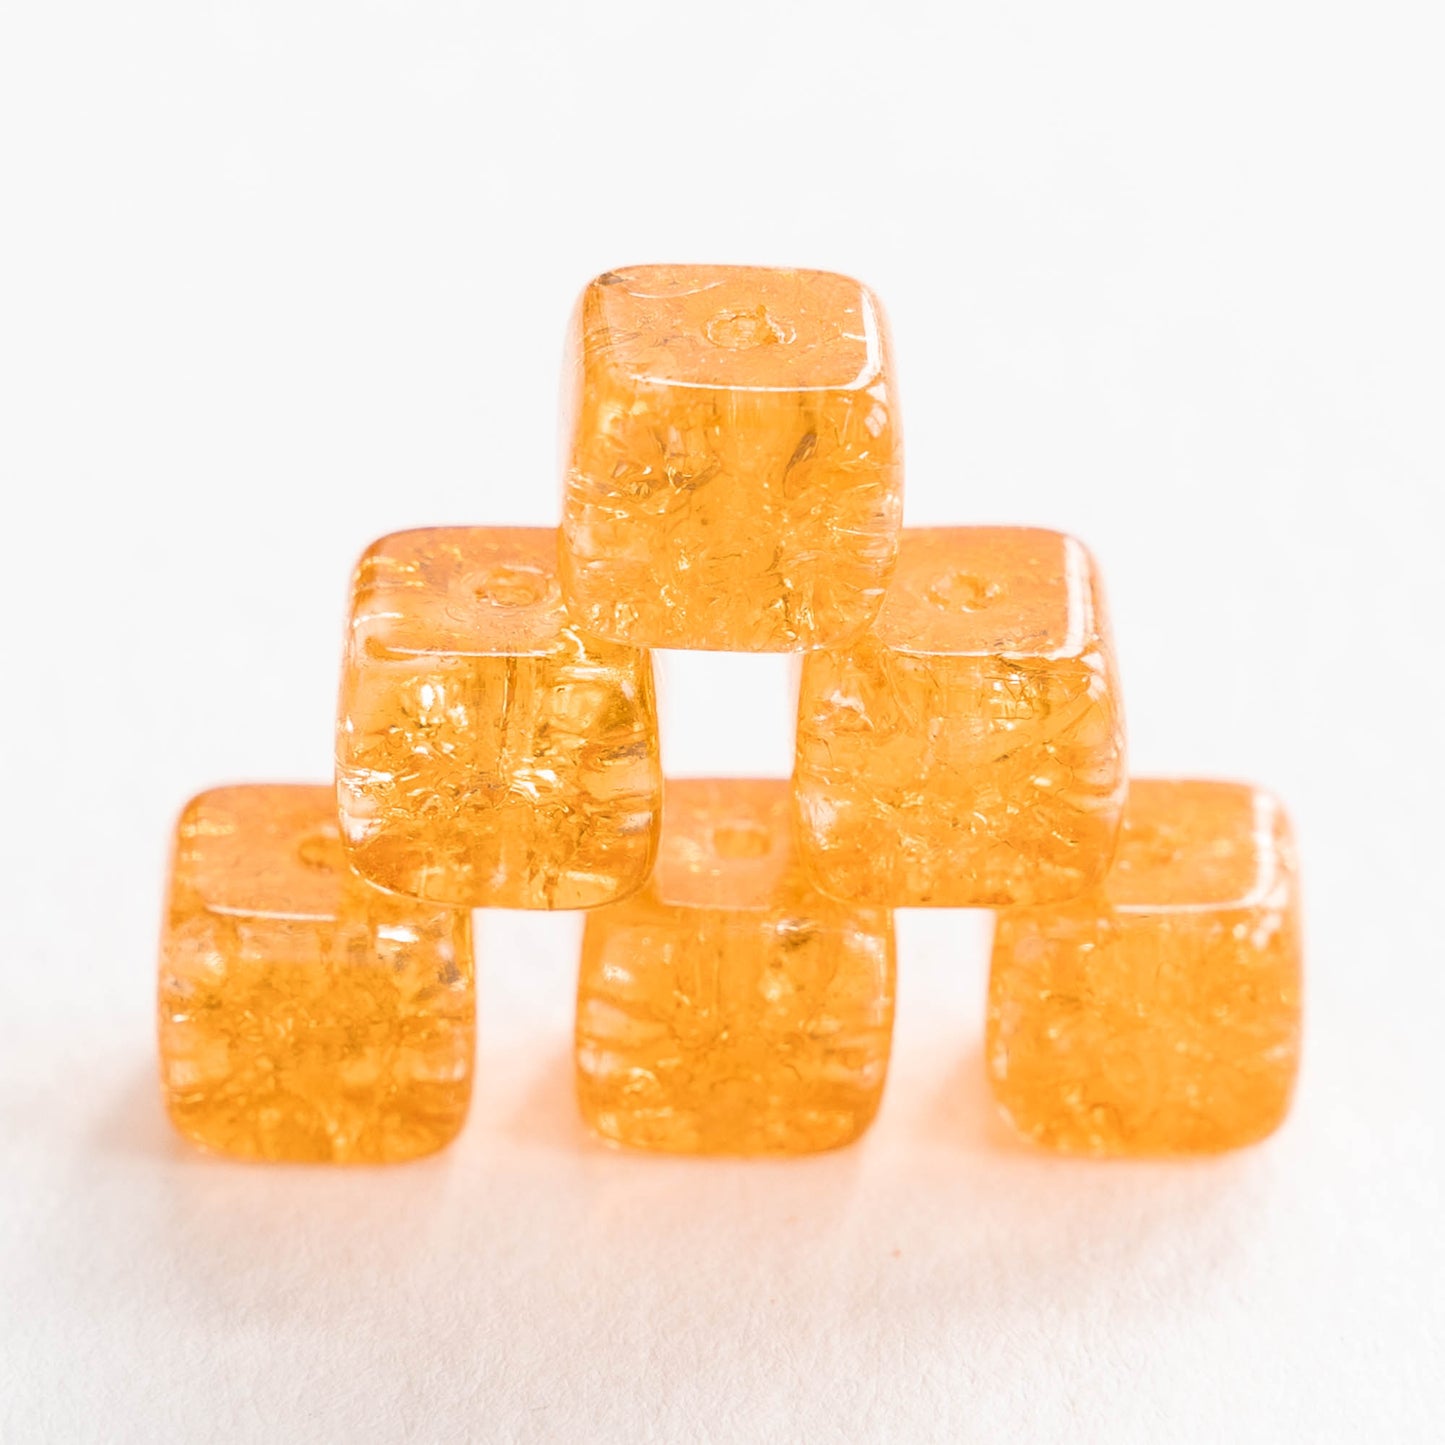 9x11mm Glass Cube Beads - Light Amber Crackle - 30 Beads